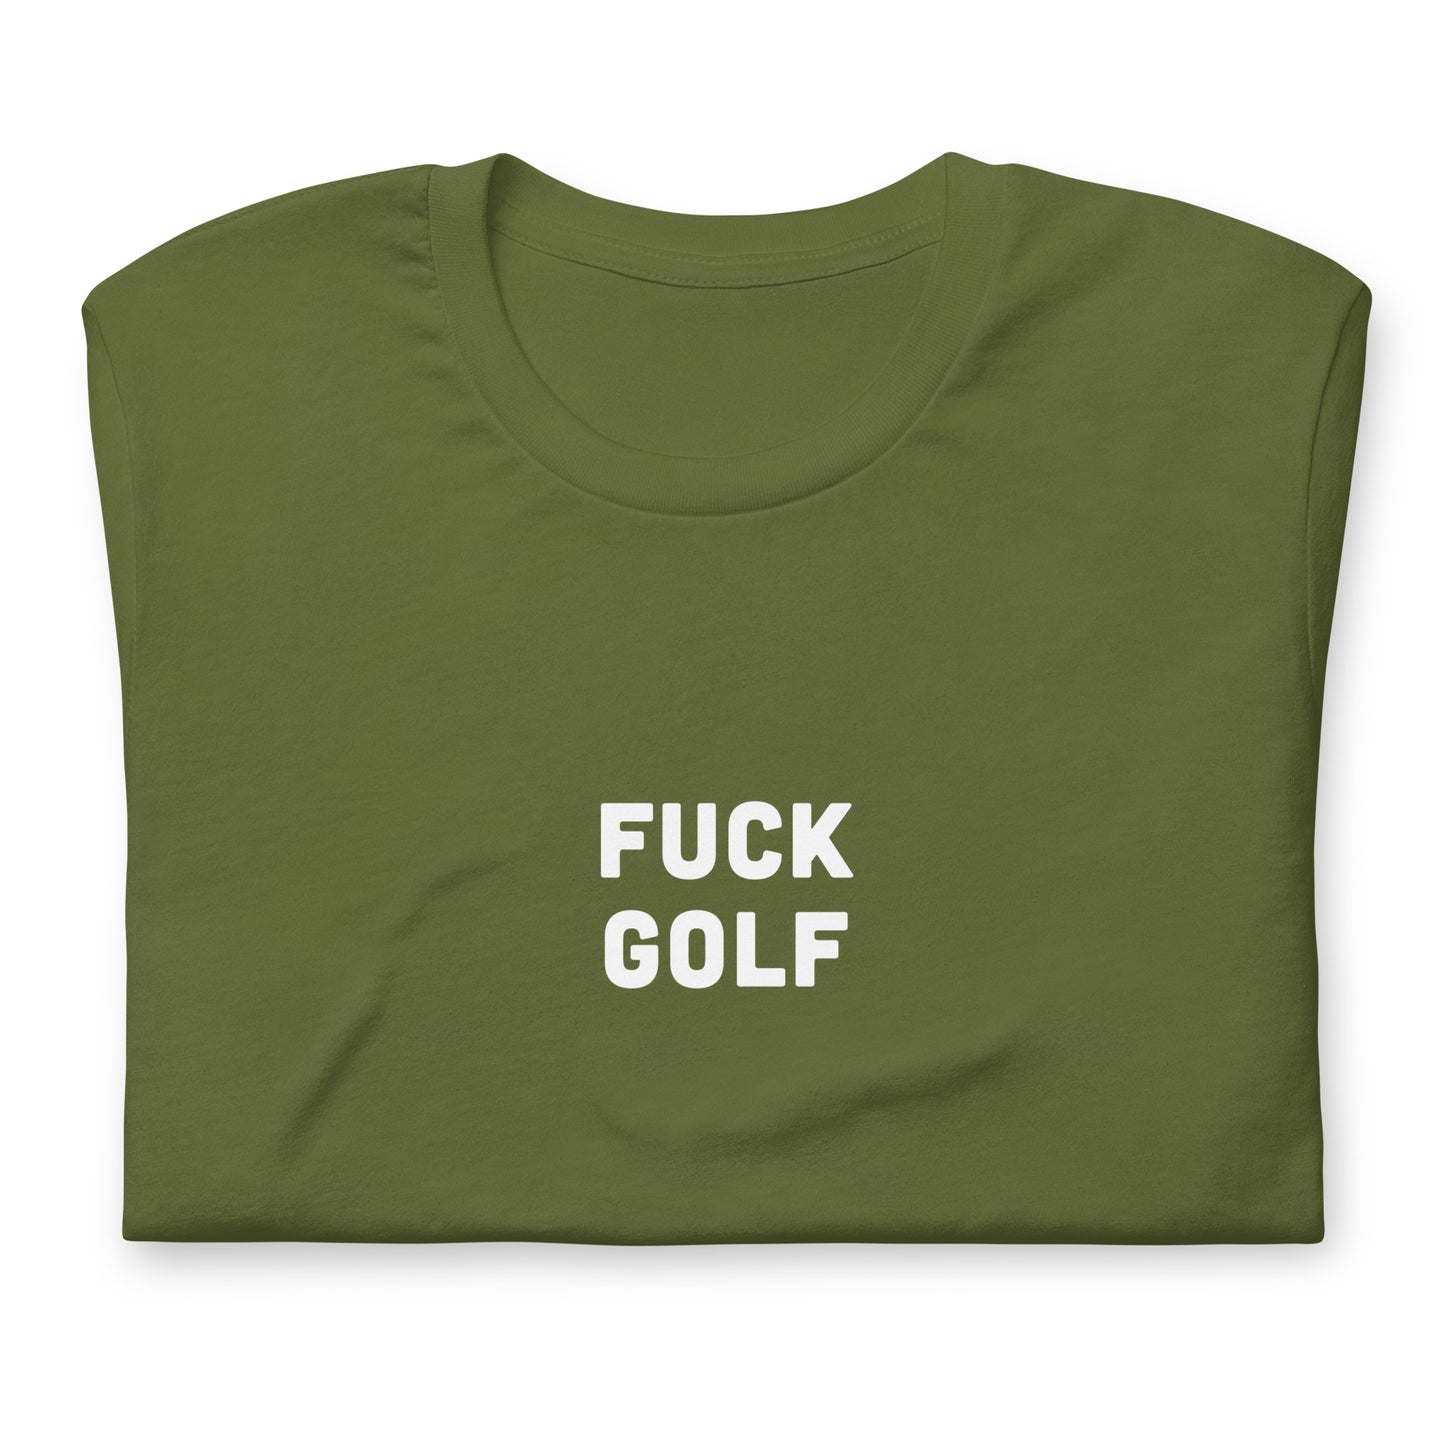 Fuck Golf T-Shirt Size S Color Navy